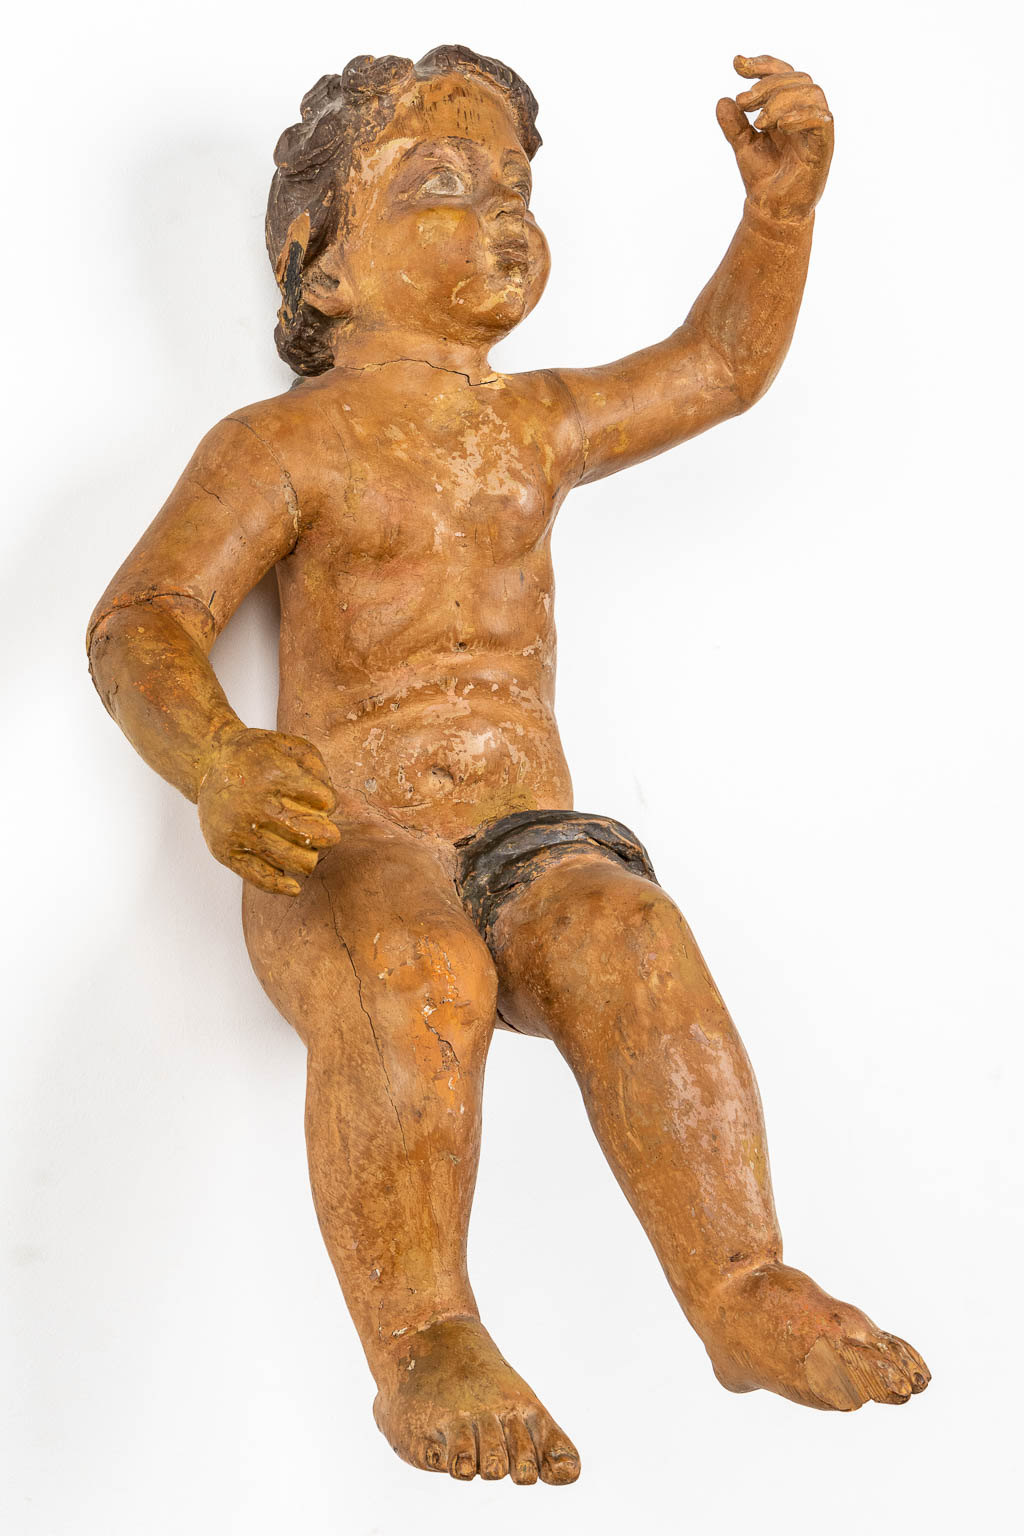 An antique figurine of a putto, sculptured and patinated wood. 18th C. (L:35 x W:34 x H:67 cm) - Image 4 of 12